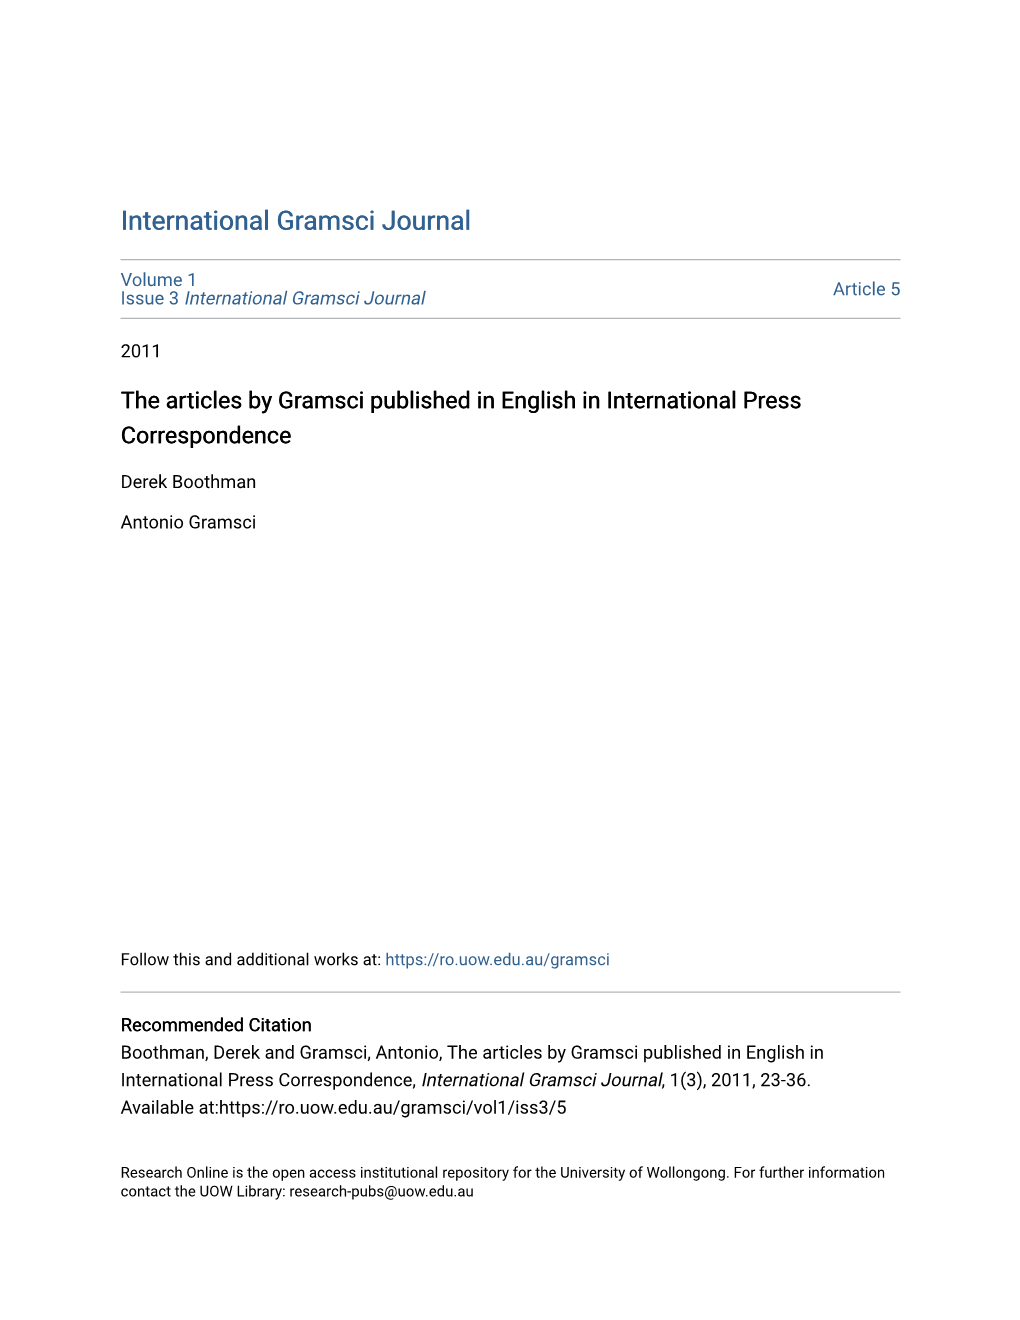 The Articles by Gramsci Published in English in International Press Correspondence